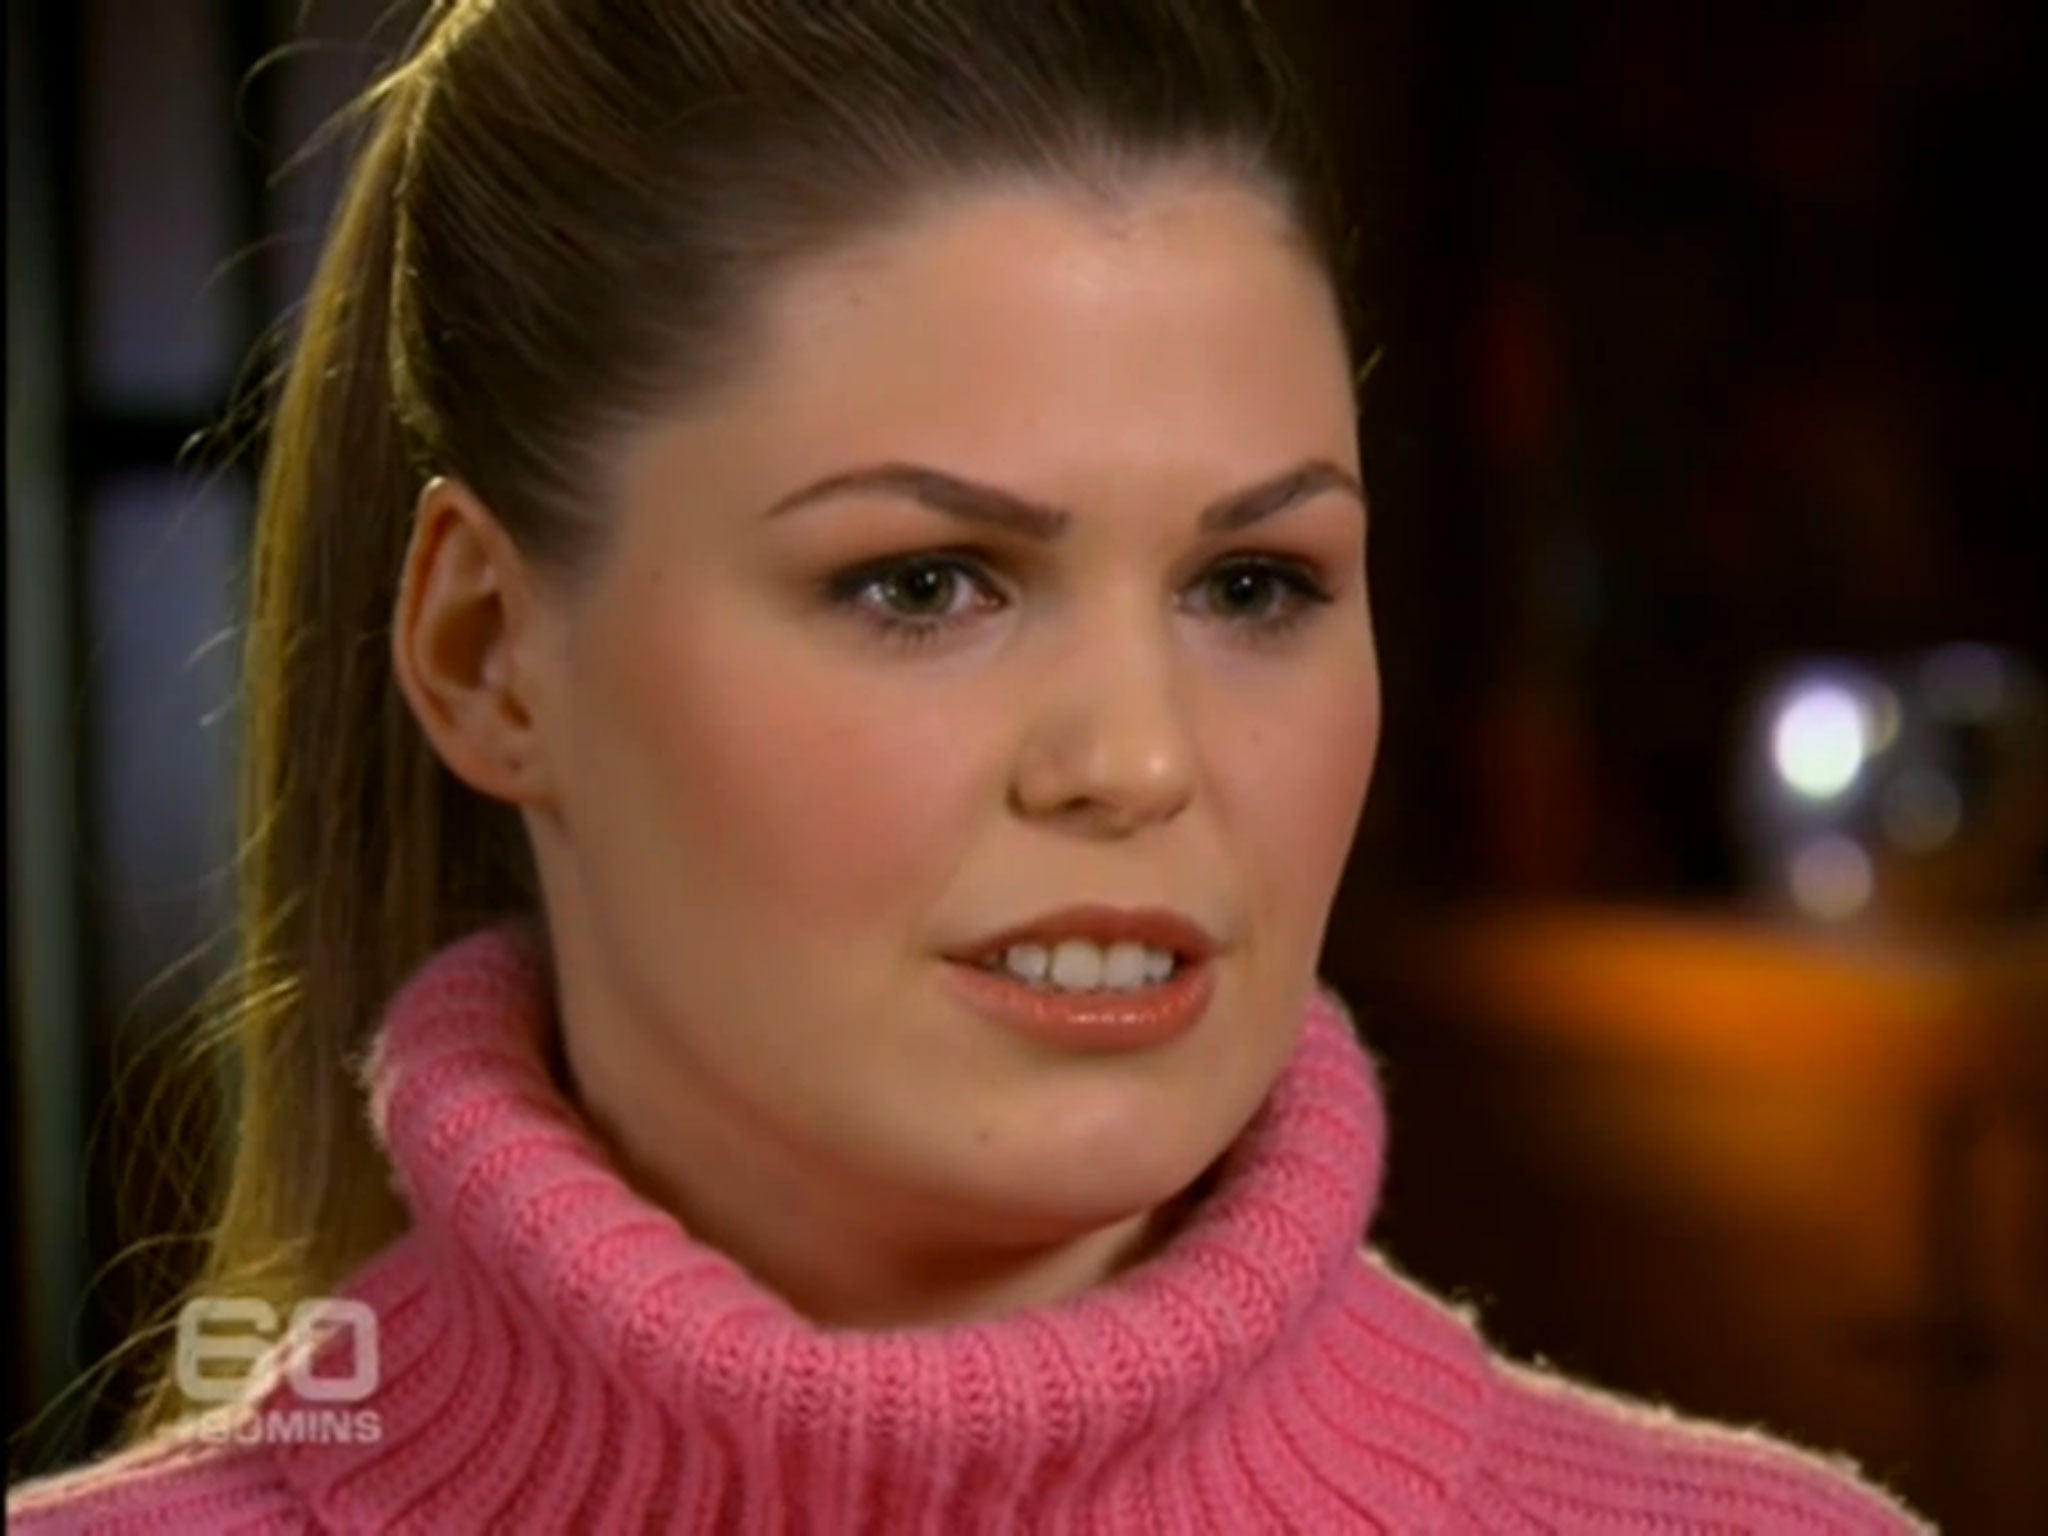 Belle Gibson was confronted about her claims in an interview with 60 Minutes journalist Tara Brown on 9 News